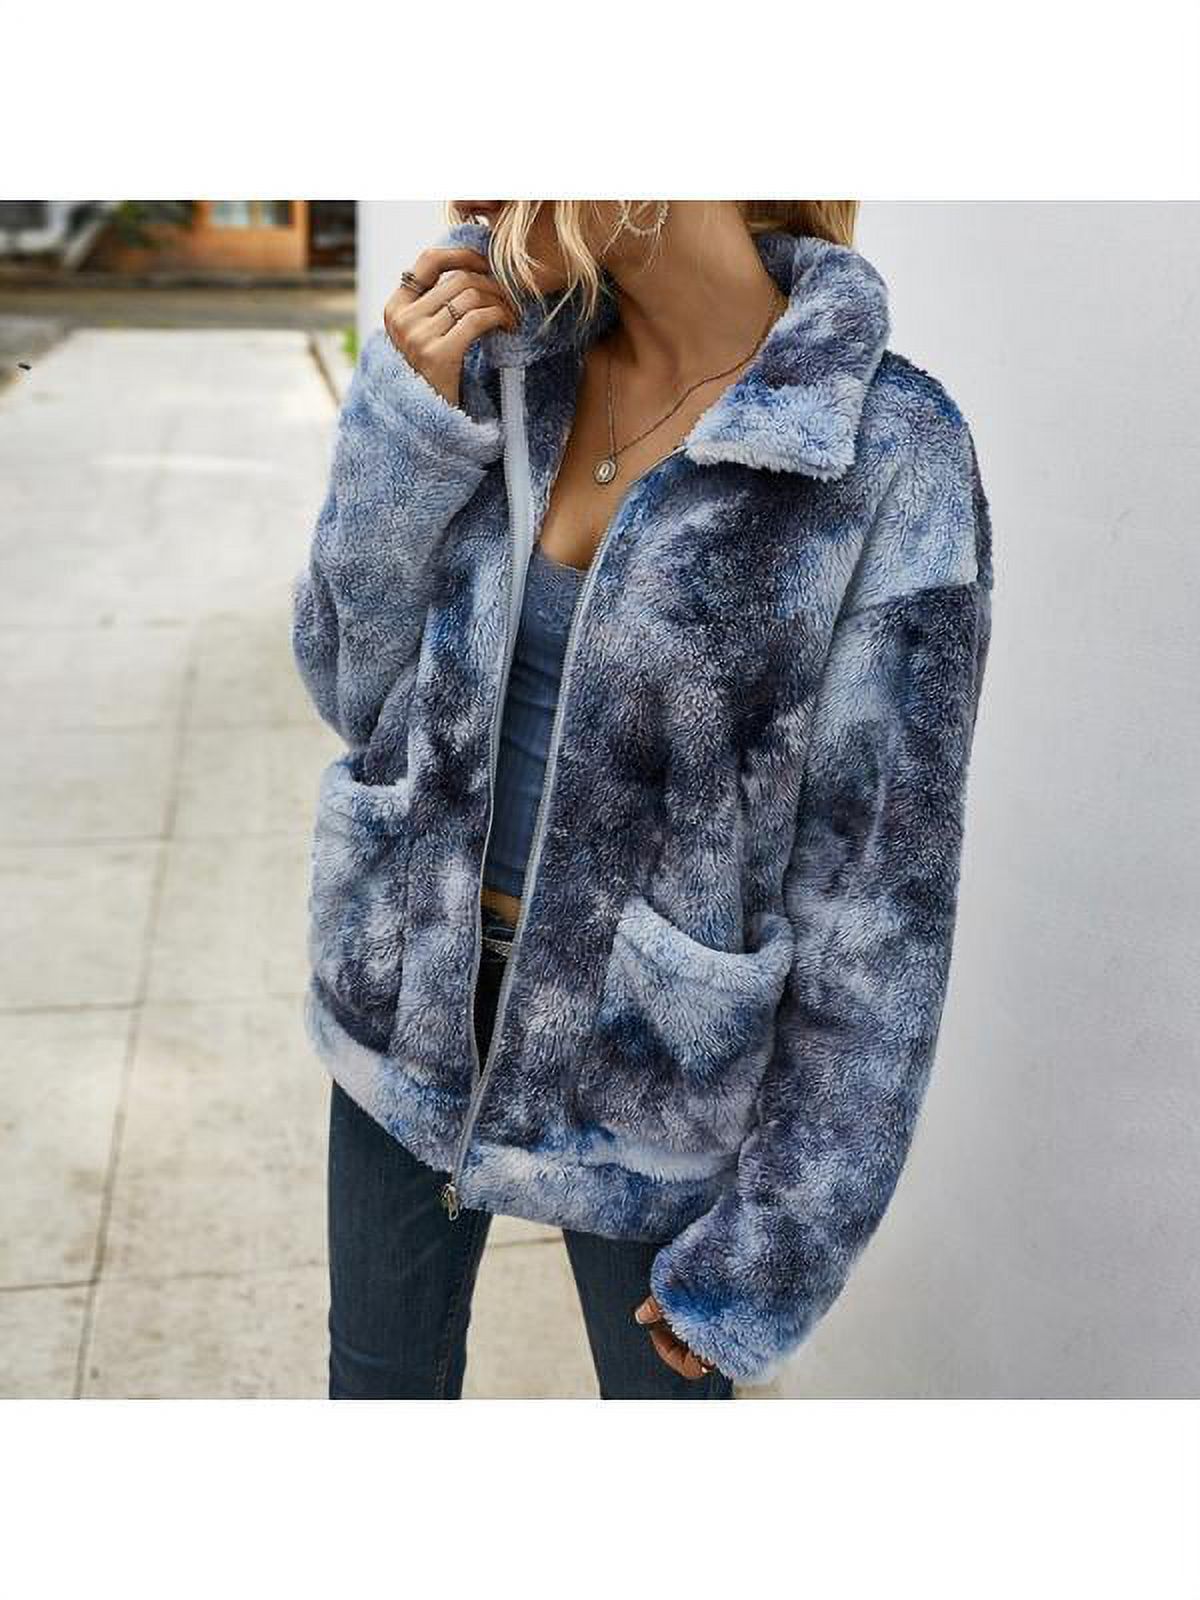 Luxsea Women Autumn Casual Ladies Fashion Tie Dye Jacket With Pocket Daily Coats - image 5 of 7